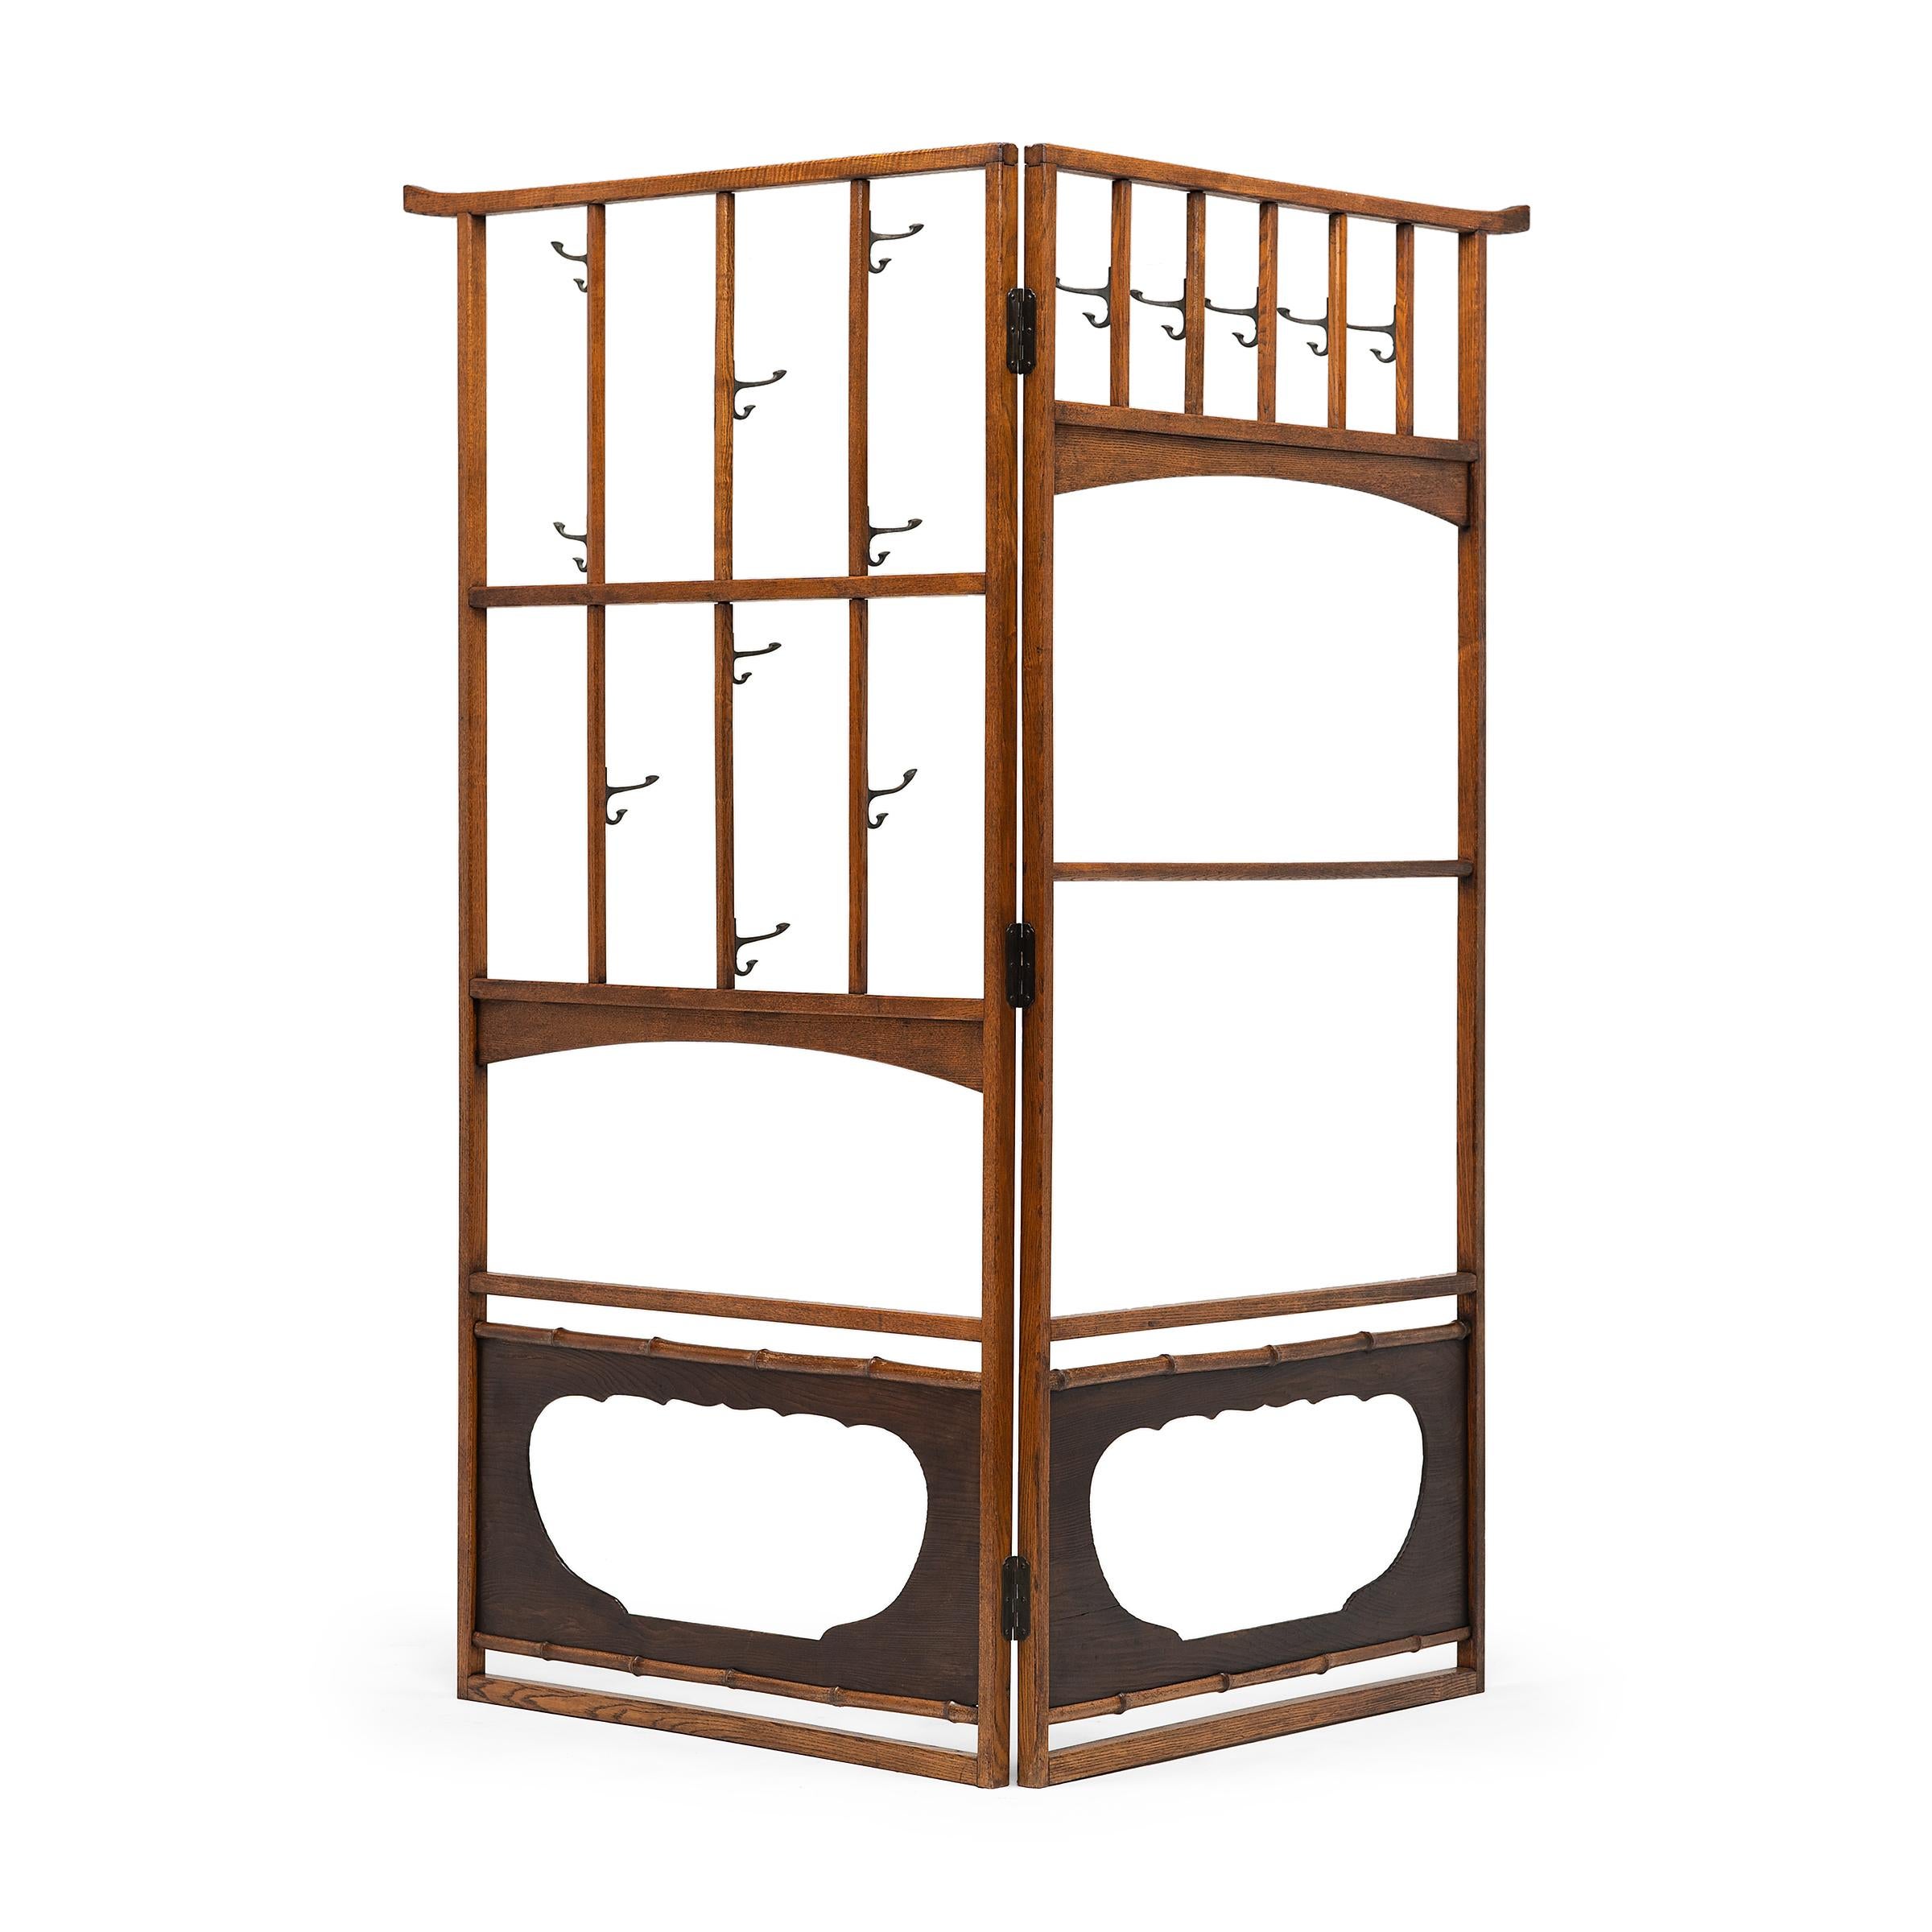 This elegant Japanese kimono stand dates to the early 20th century and is an updated example of traditional garment racks used to display silk obi sashes, kimono, and haori jackets. Crafted of thin strips of oak, the stand features an overhung top